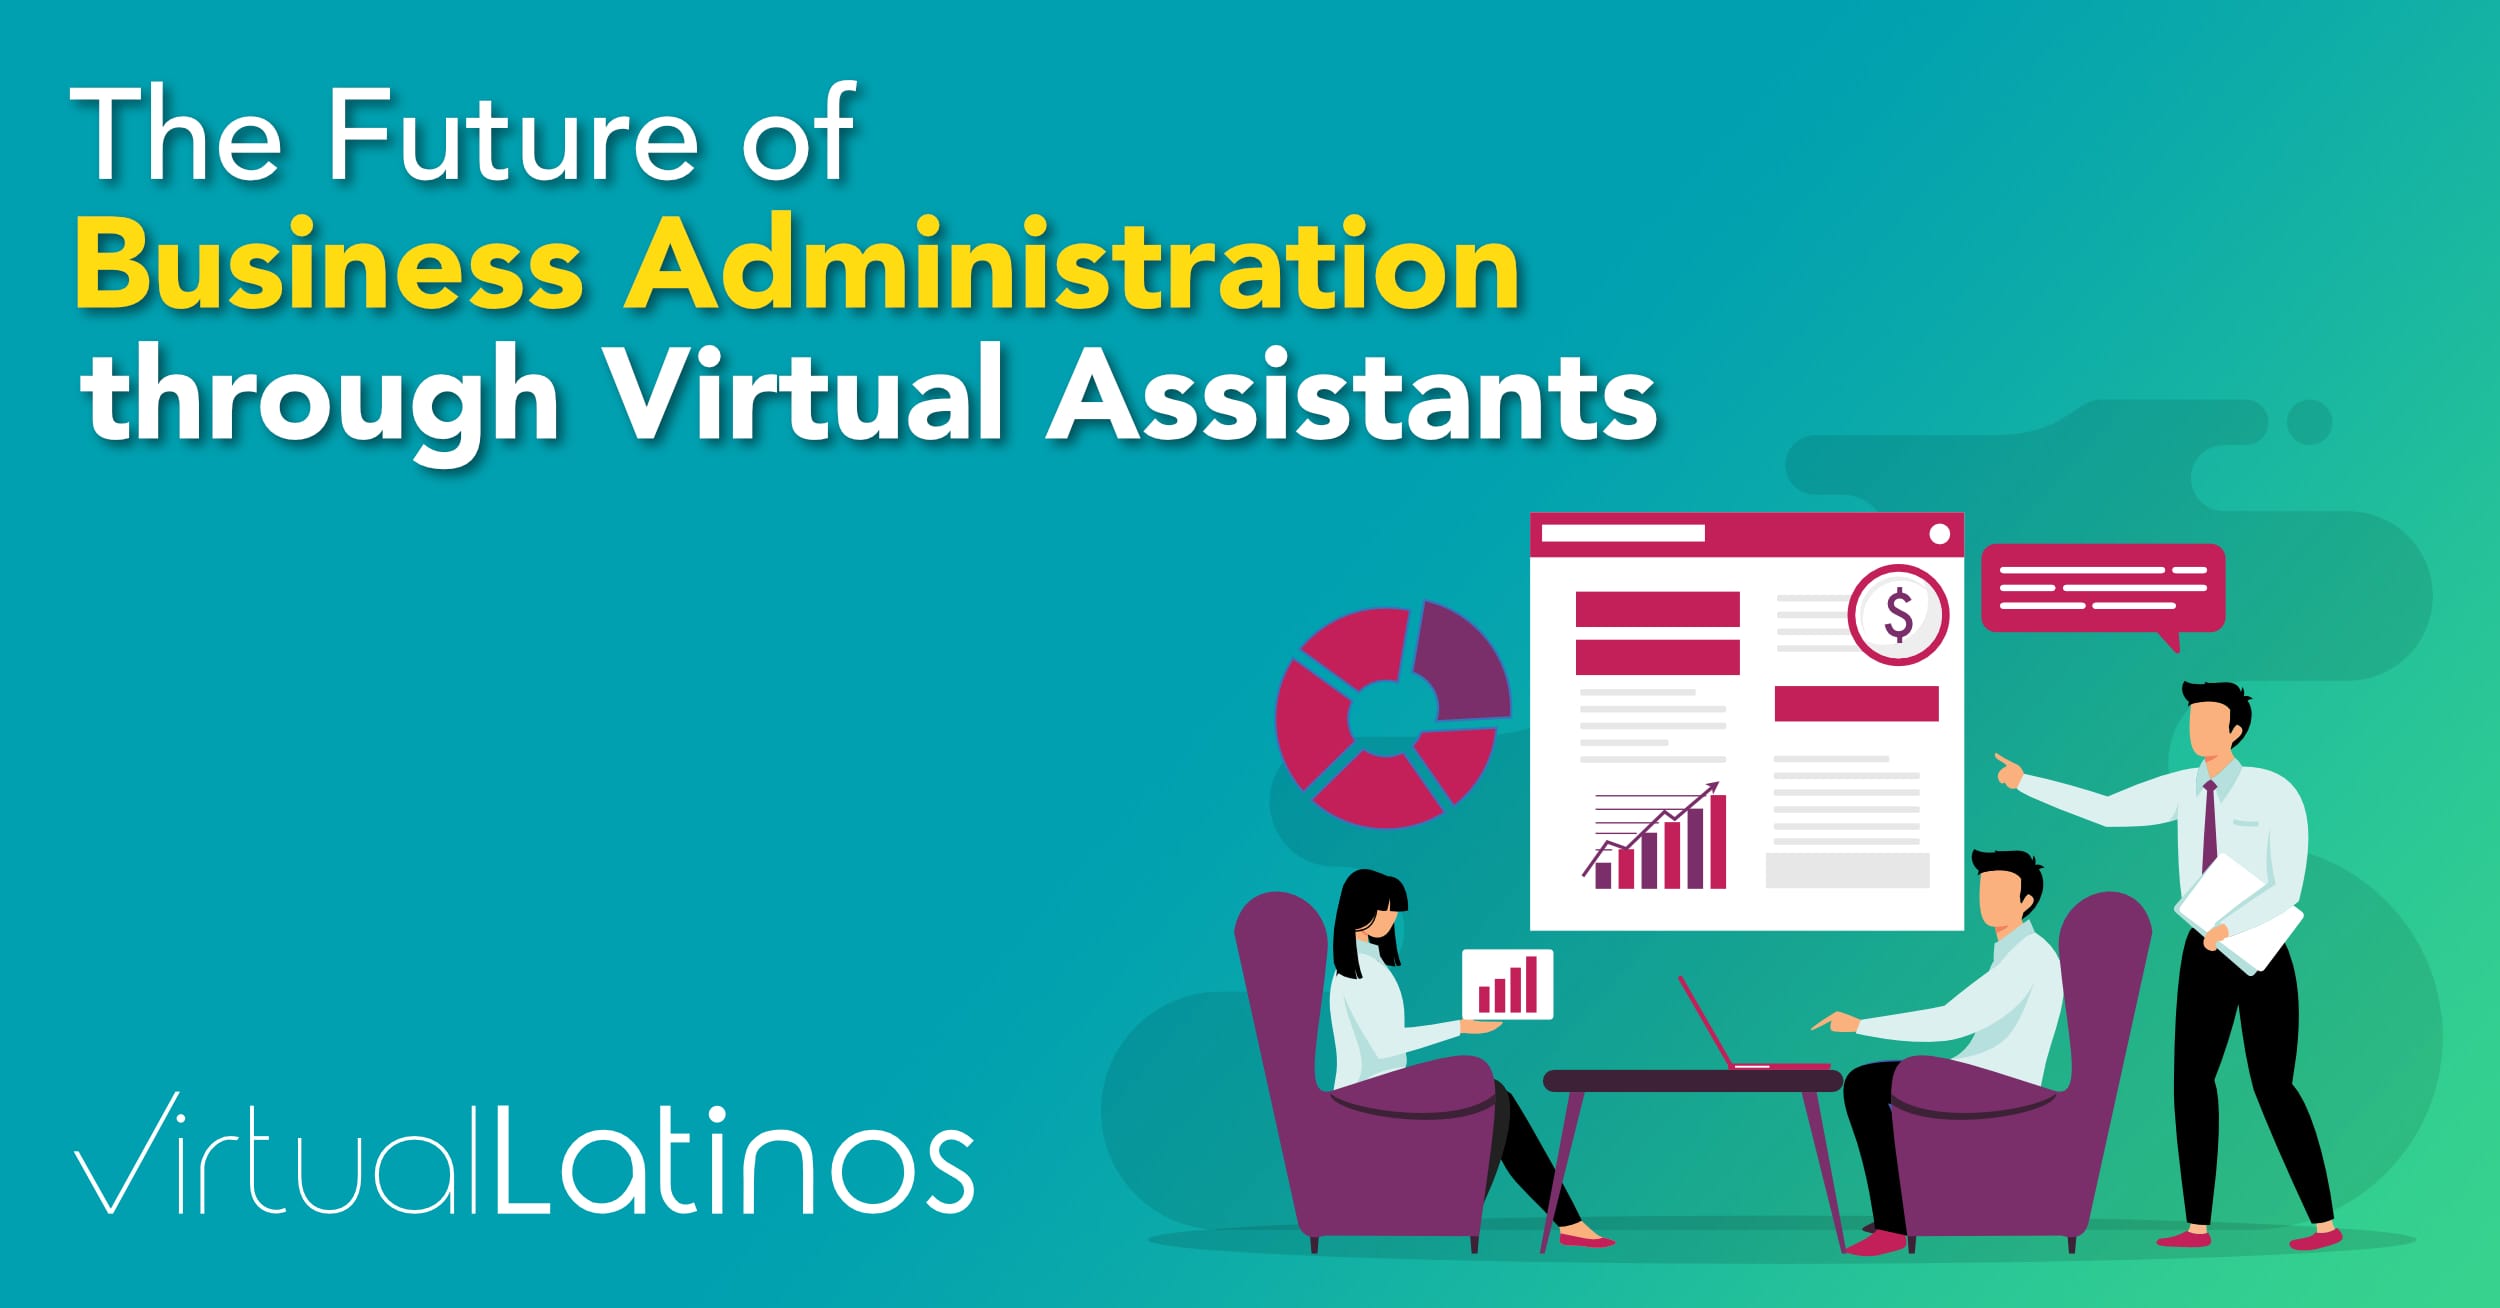 Business Administration through Virtual Assistants